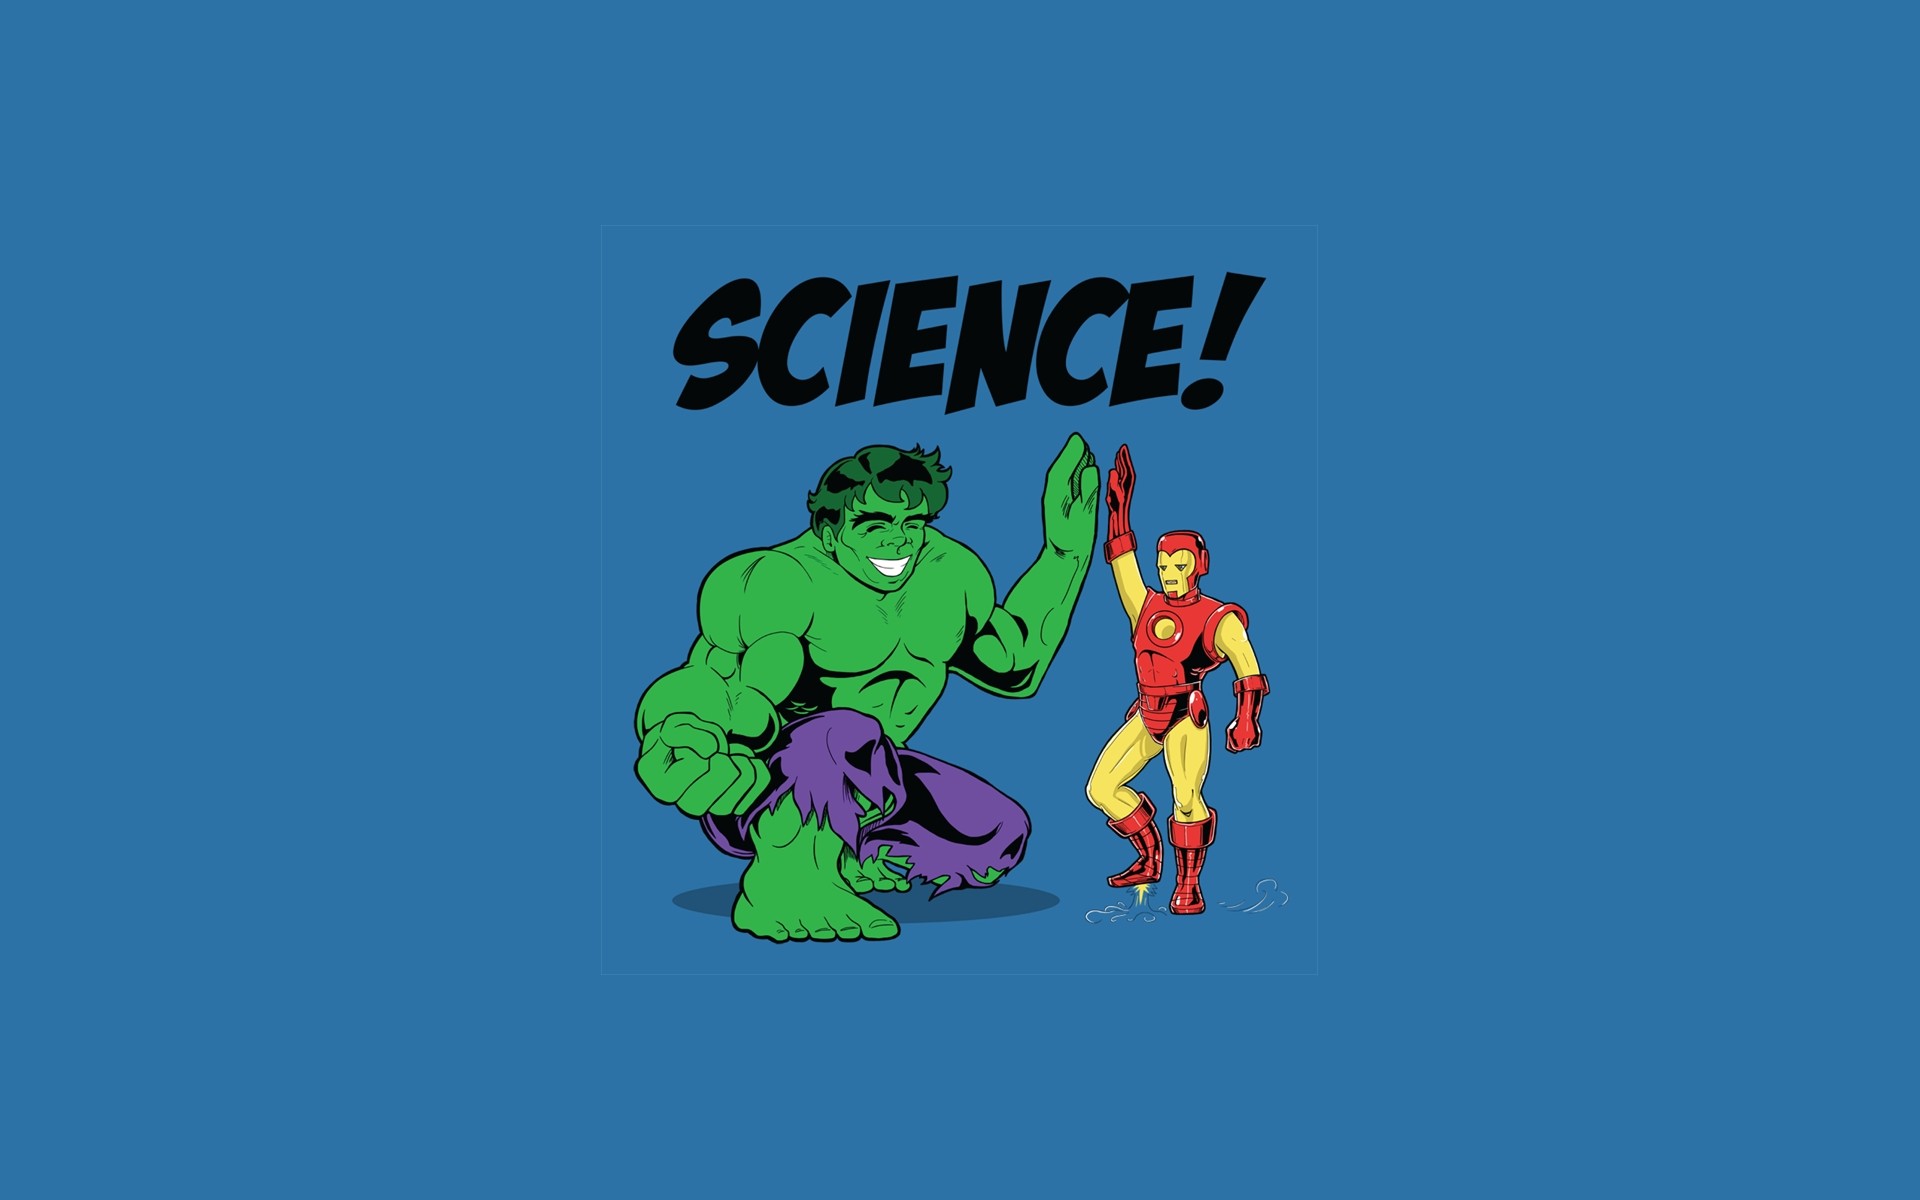  Science Google Backgrounds Hulk and Iron Man Science Google Themes